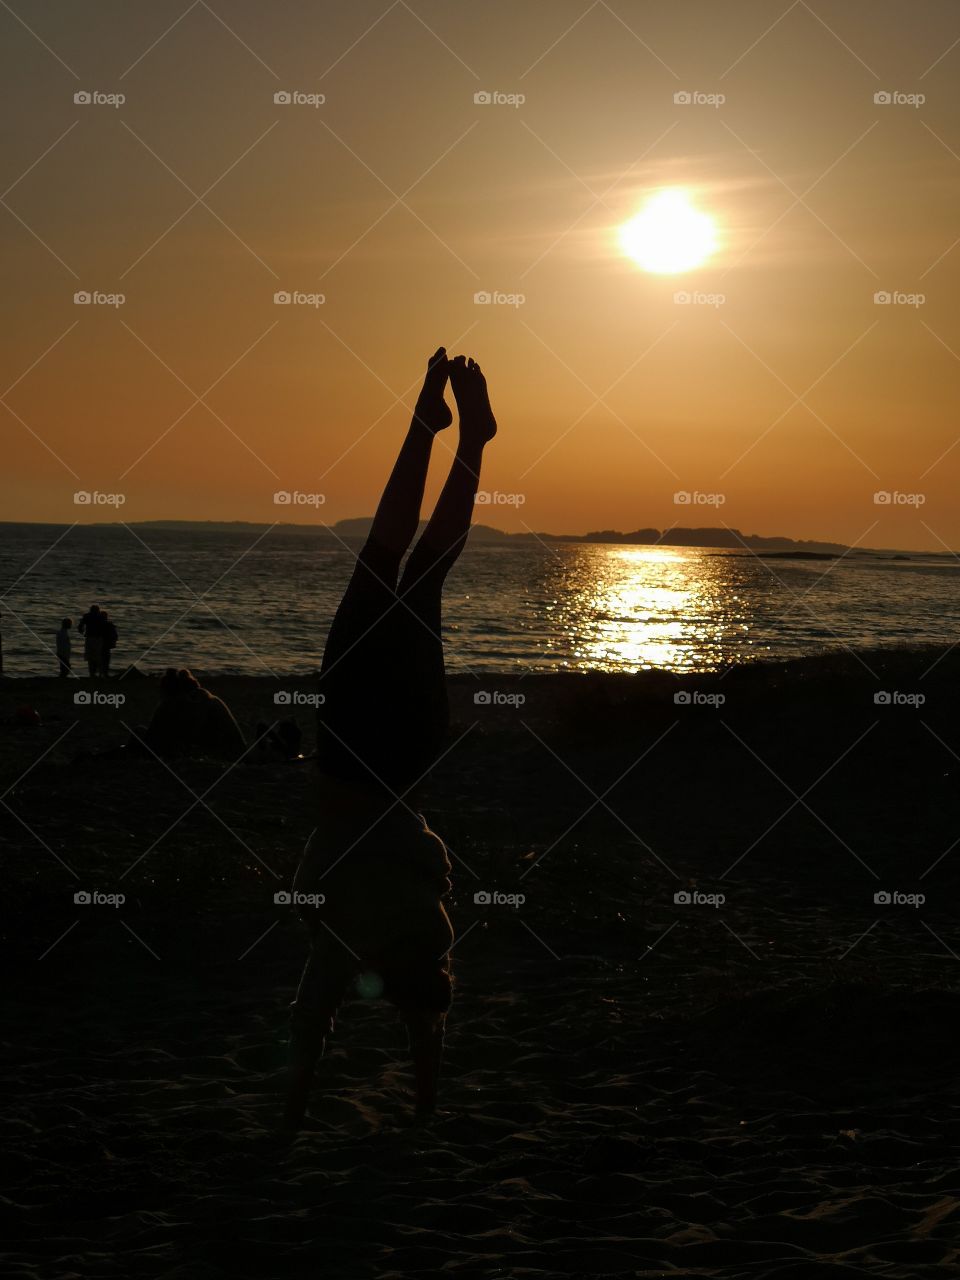 Sunset handstand at the beach